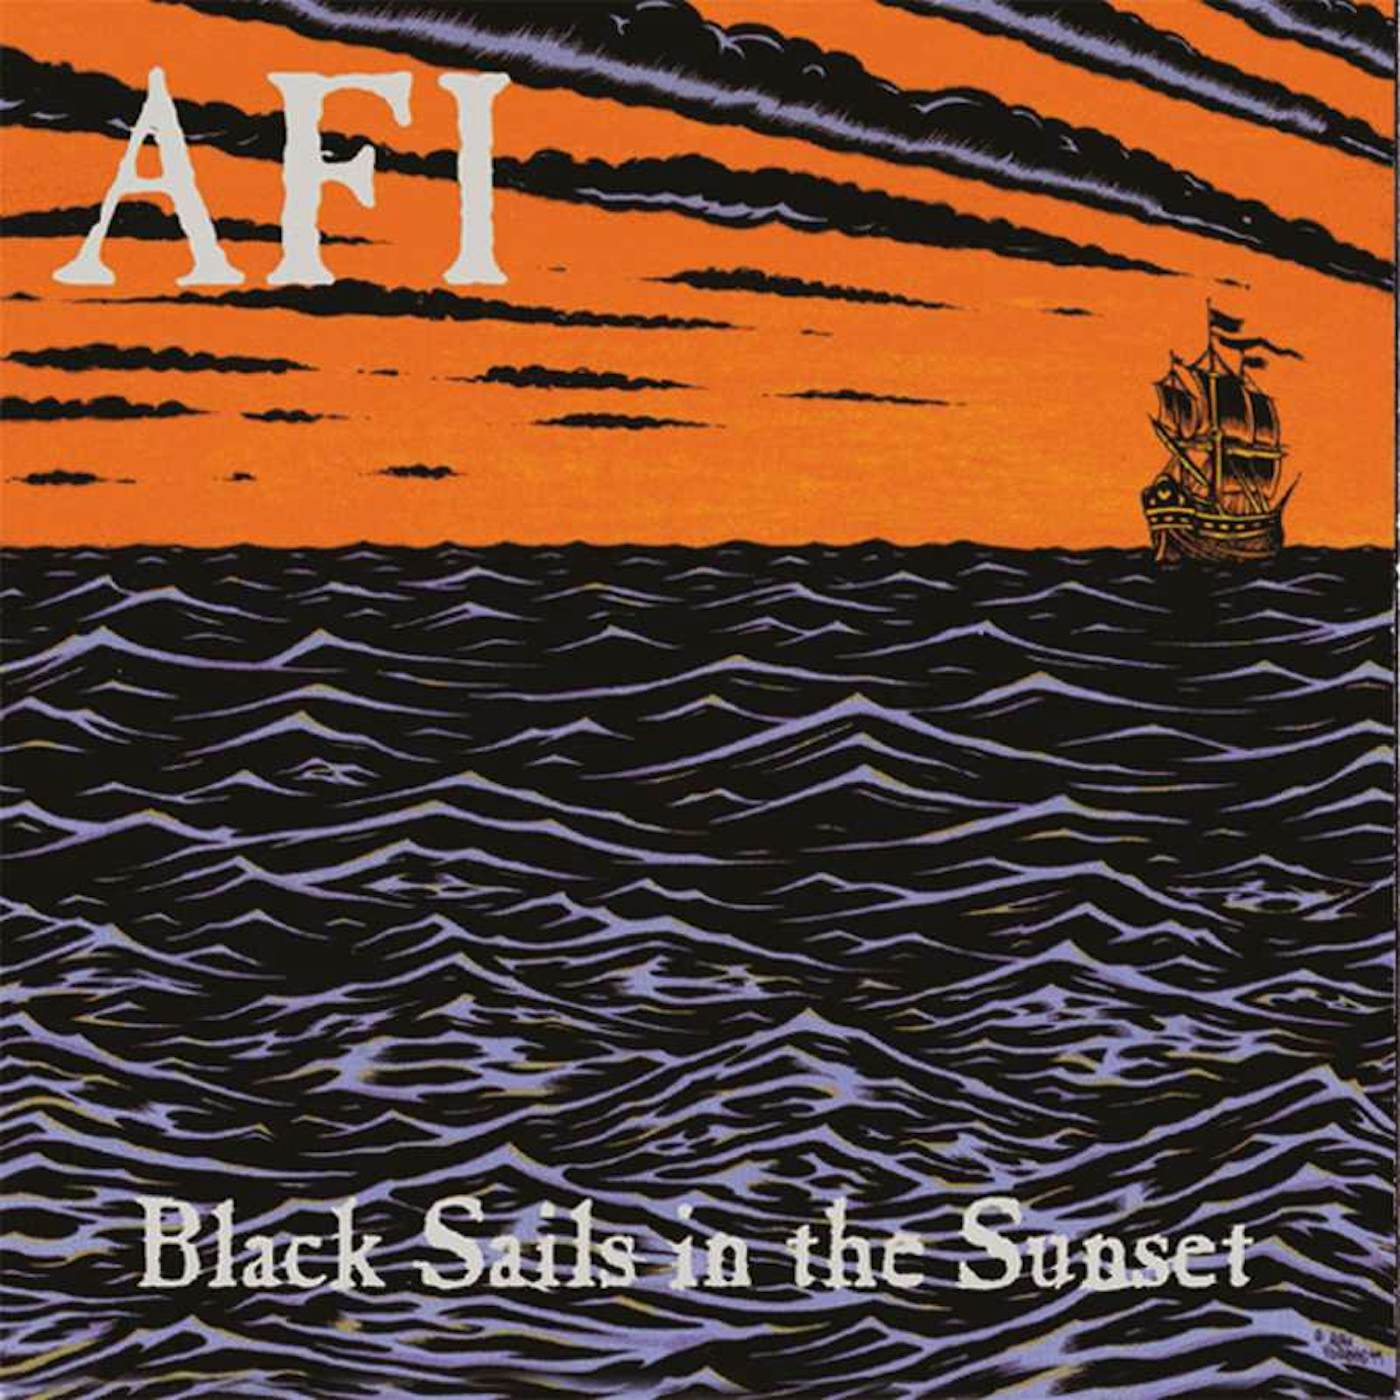 AFI BLACK SAILS IN THE SUNSET Vinyl Record